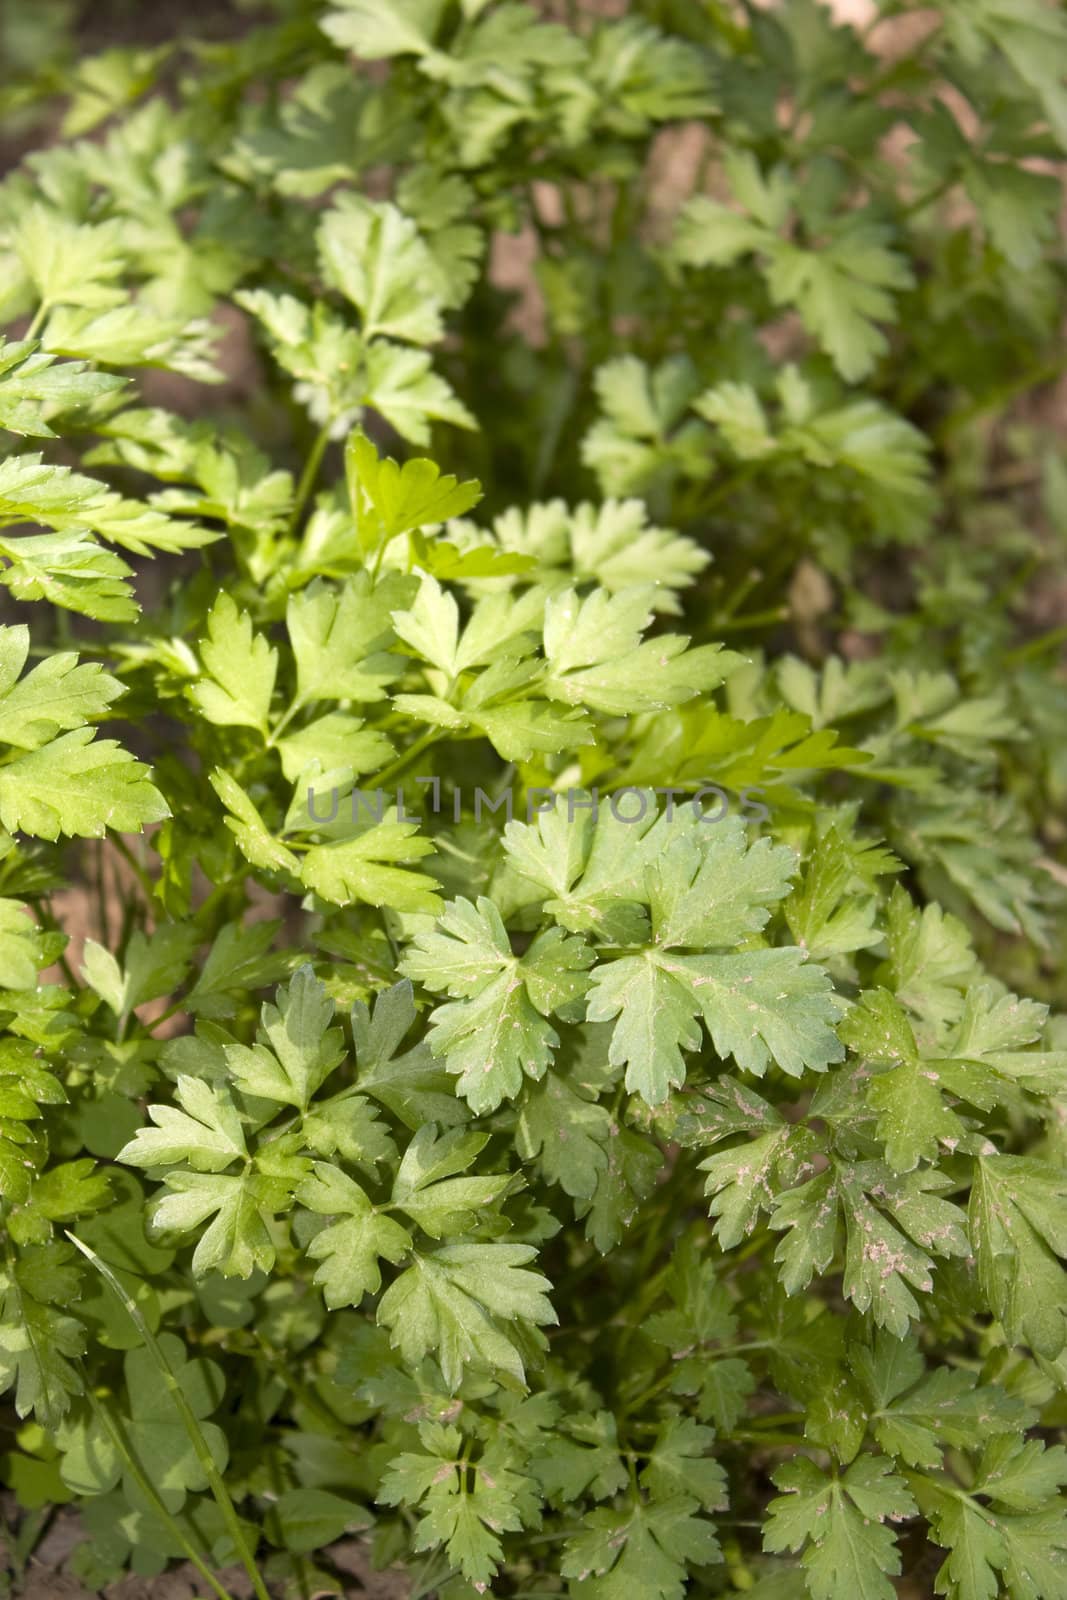 Some fresh, green parsley growing in the garden.